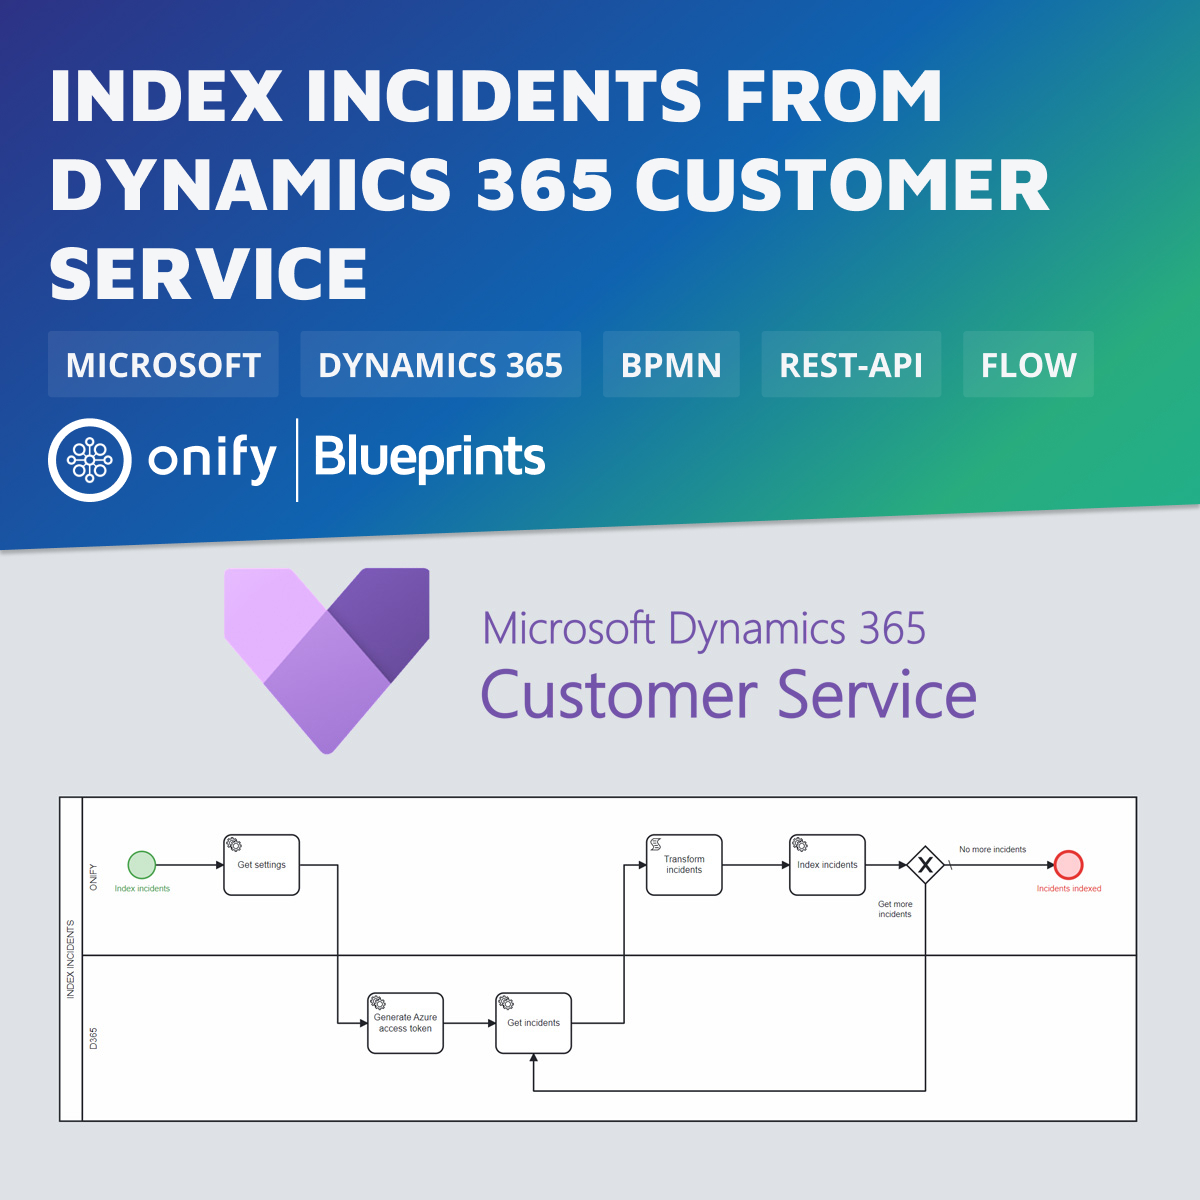 Onify Blueprint – Index incidents from Dynamics 365 Customer Service